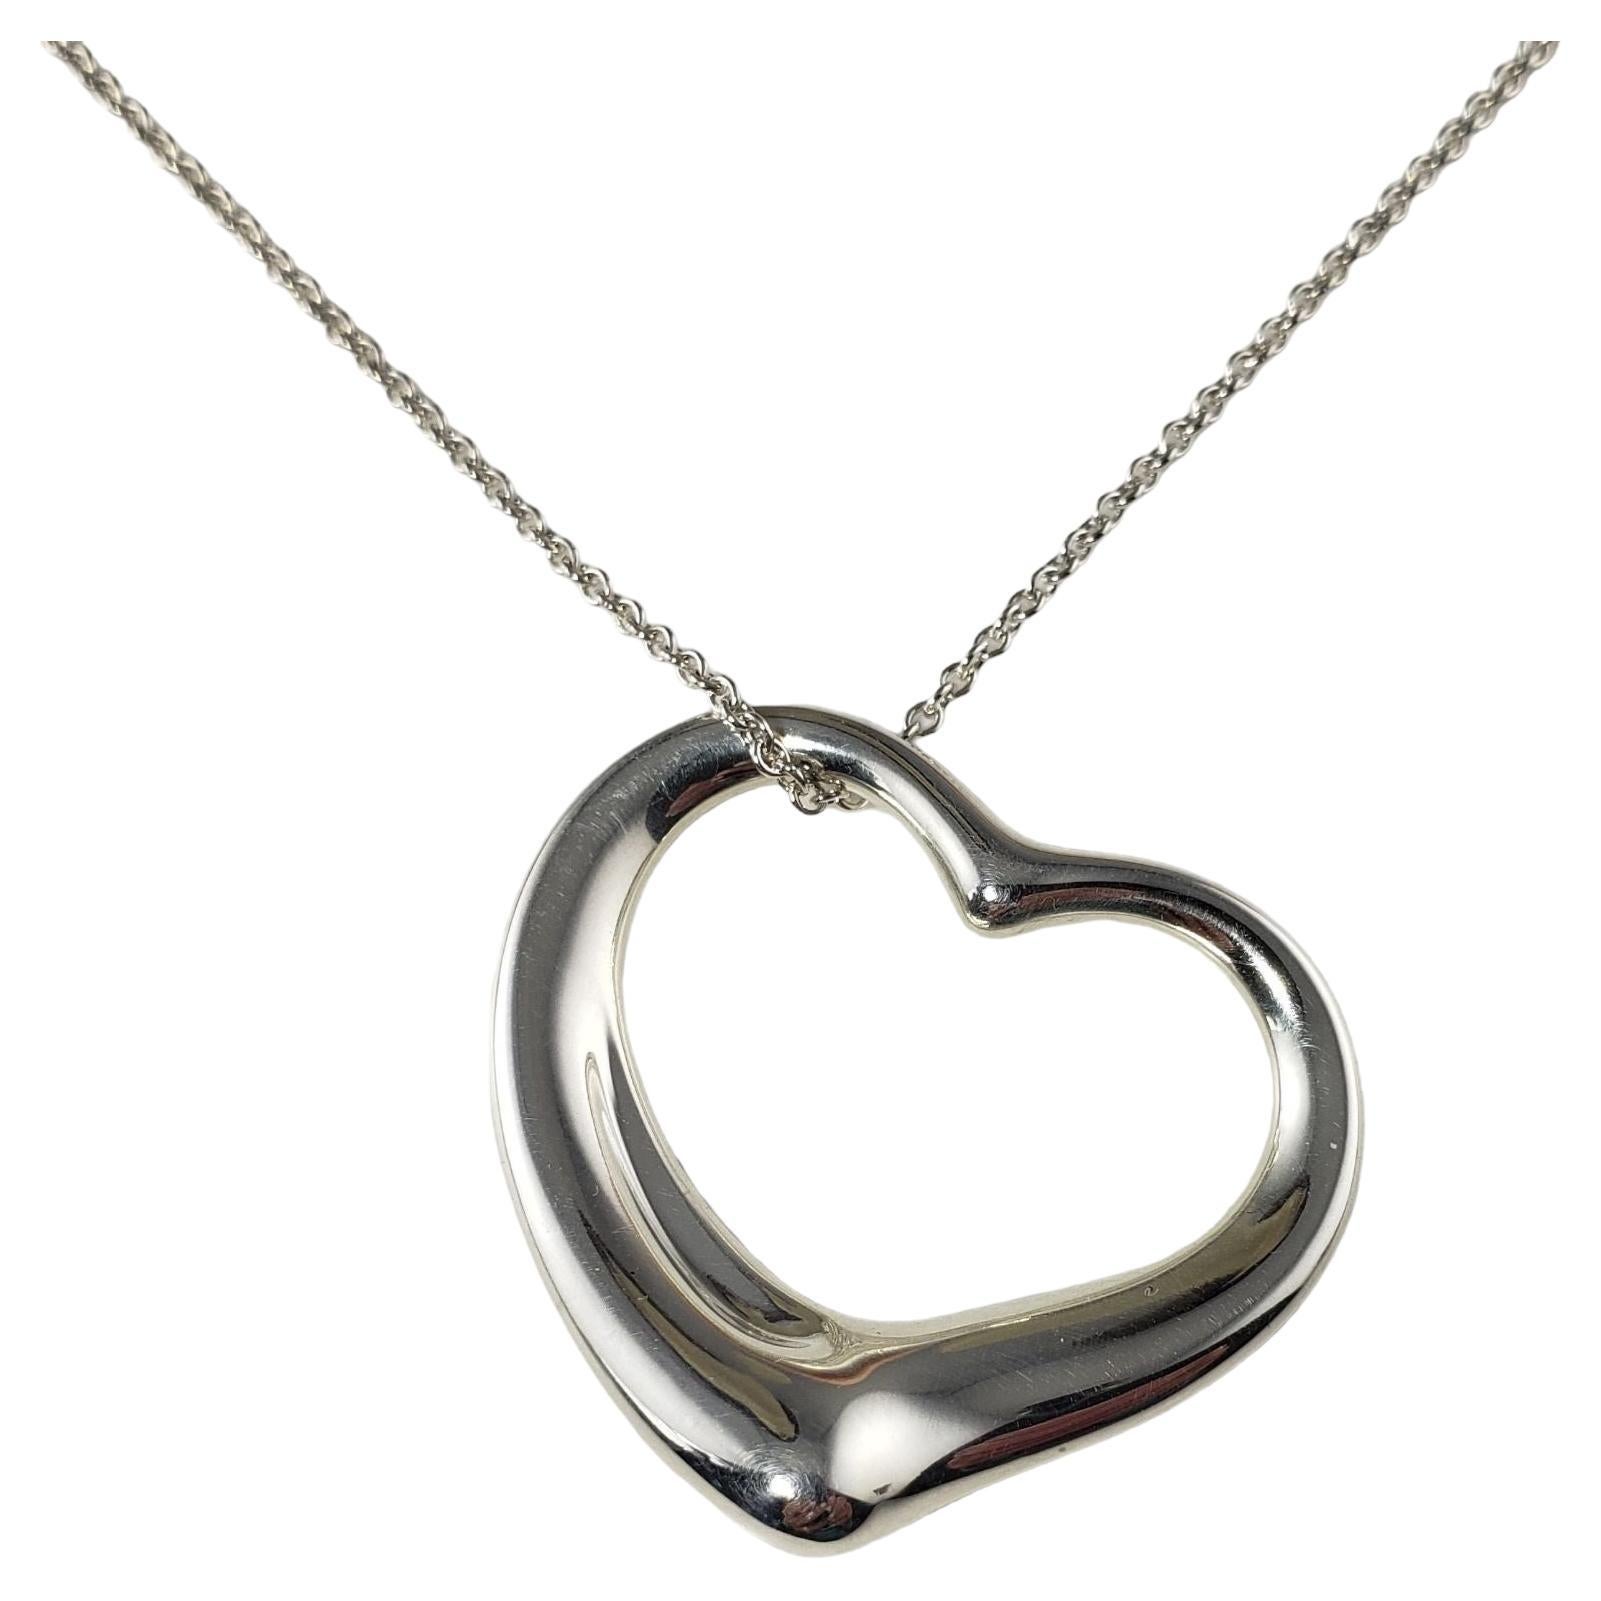 What is a floating heart necklace?